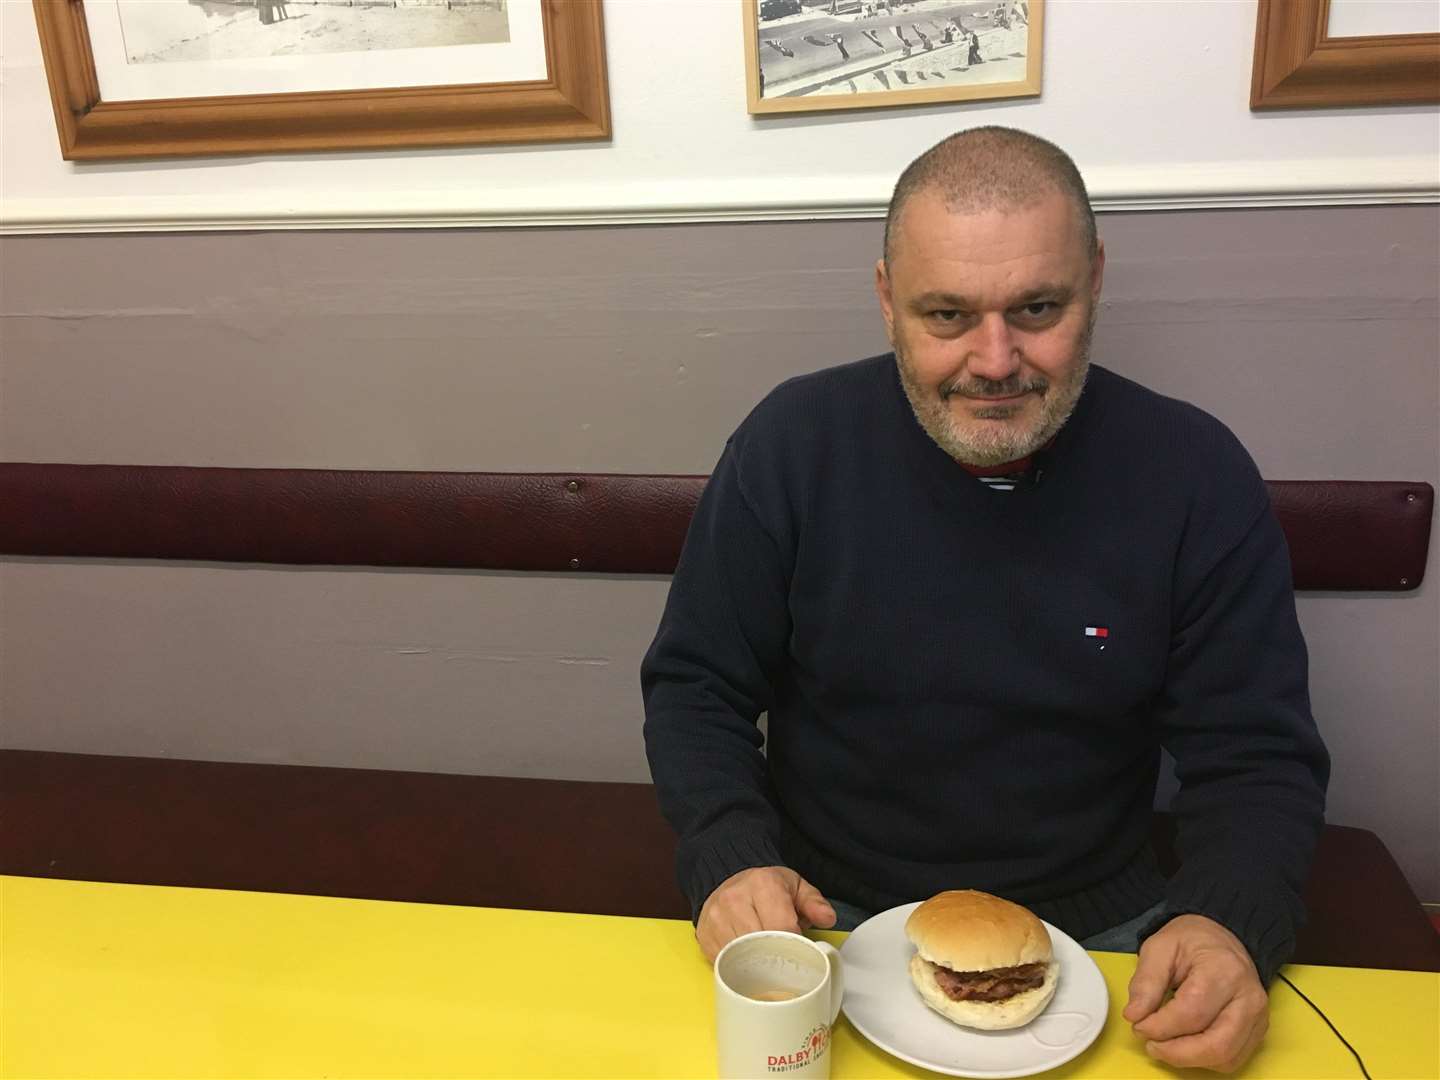 Dean Stalham, who runs The Stretch Outsider Arts Gallery in Margate, was fined for spitting but the writer and gallery manager says he was coughing on a piece of bacon which was caught on his sleeve (6769236)